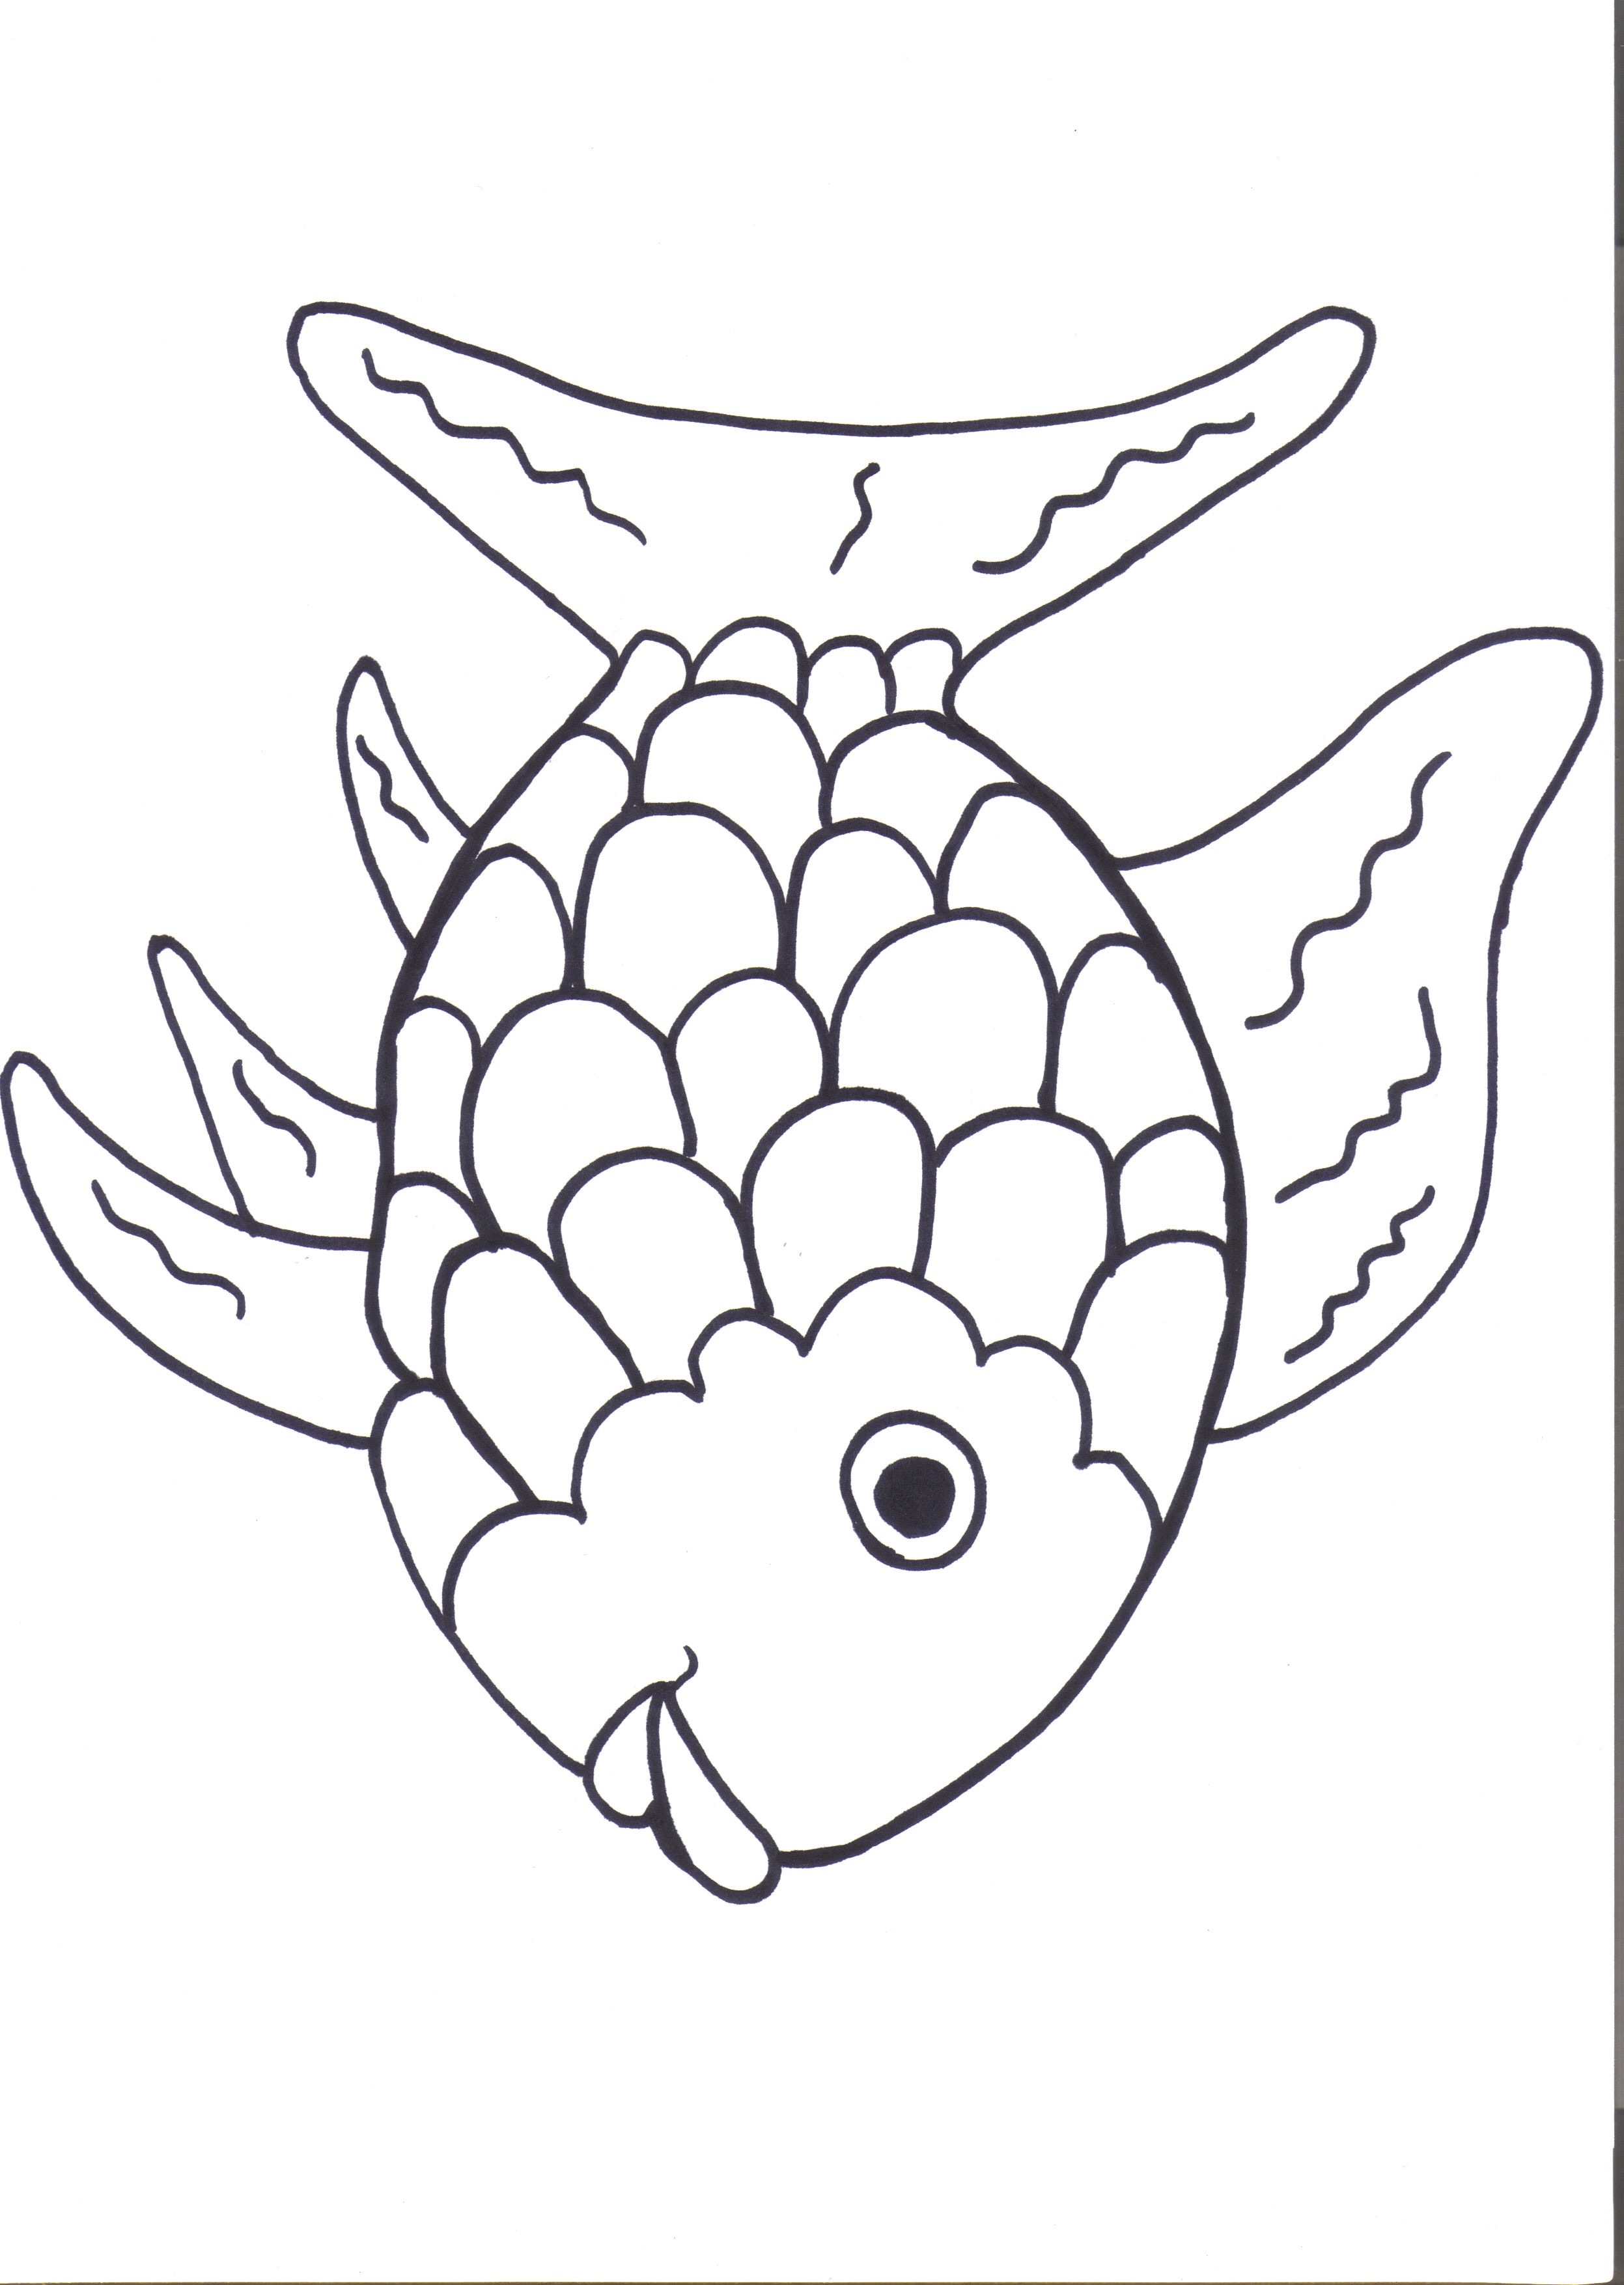 Rainbow Fish Outline Cliparts.co